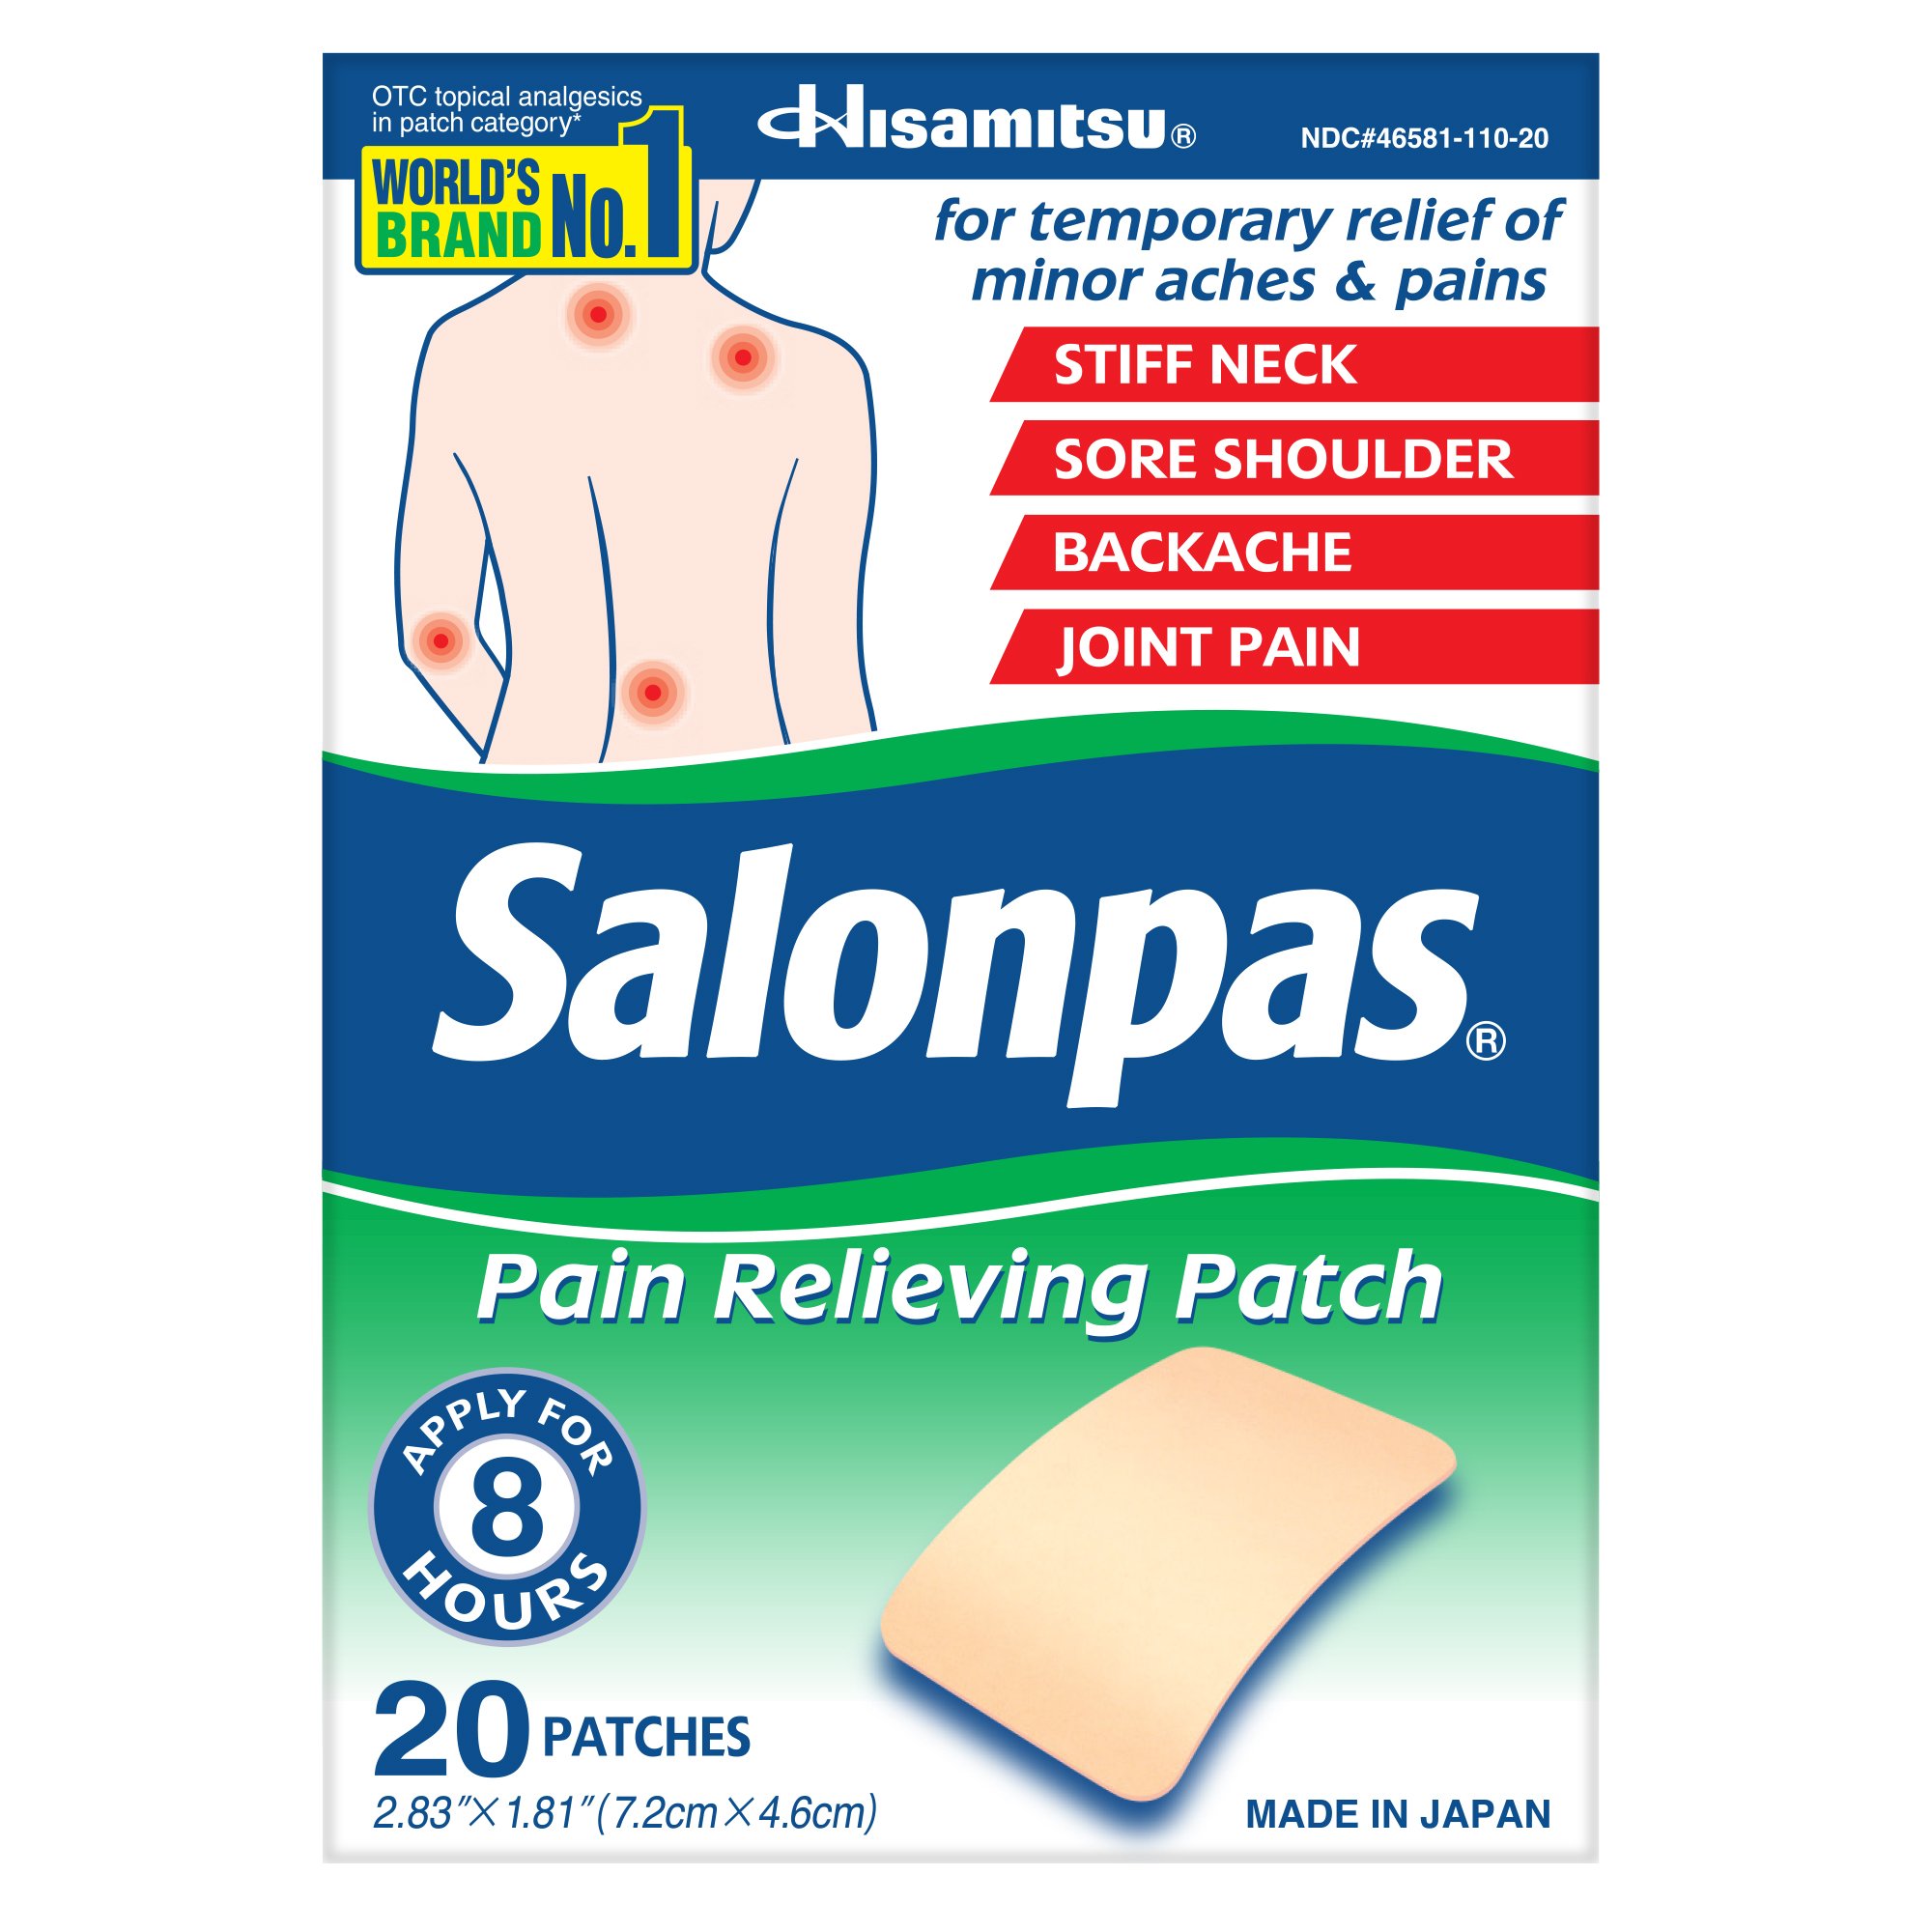 Salonpas Pain Relieving Patch, 8-Hour Pain Relief, 20 Patches - image 1 of 6